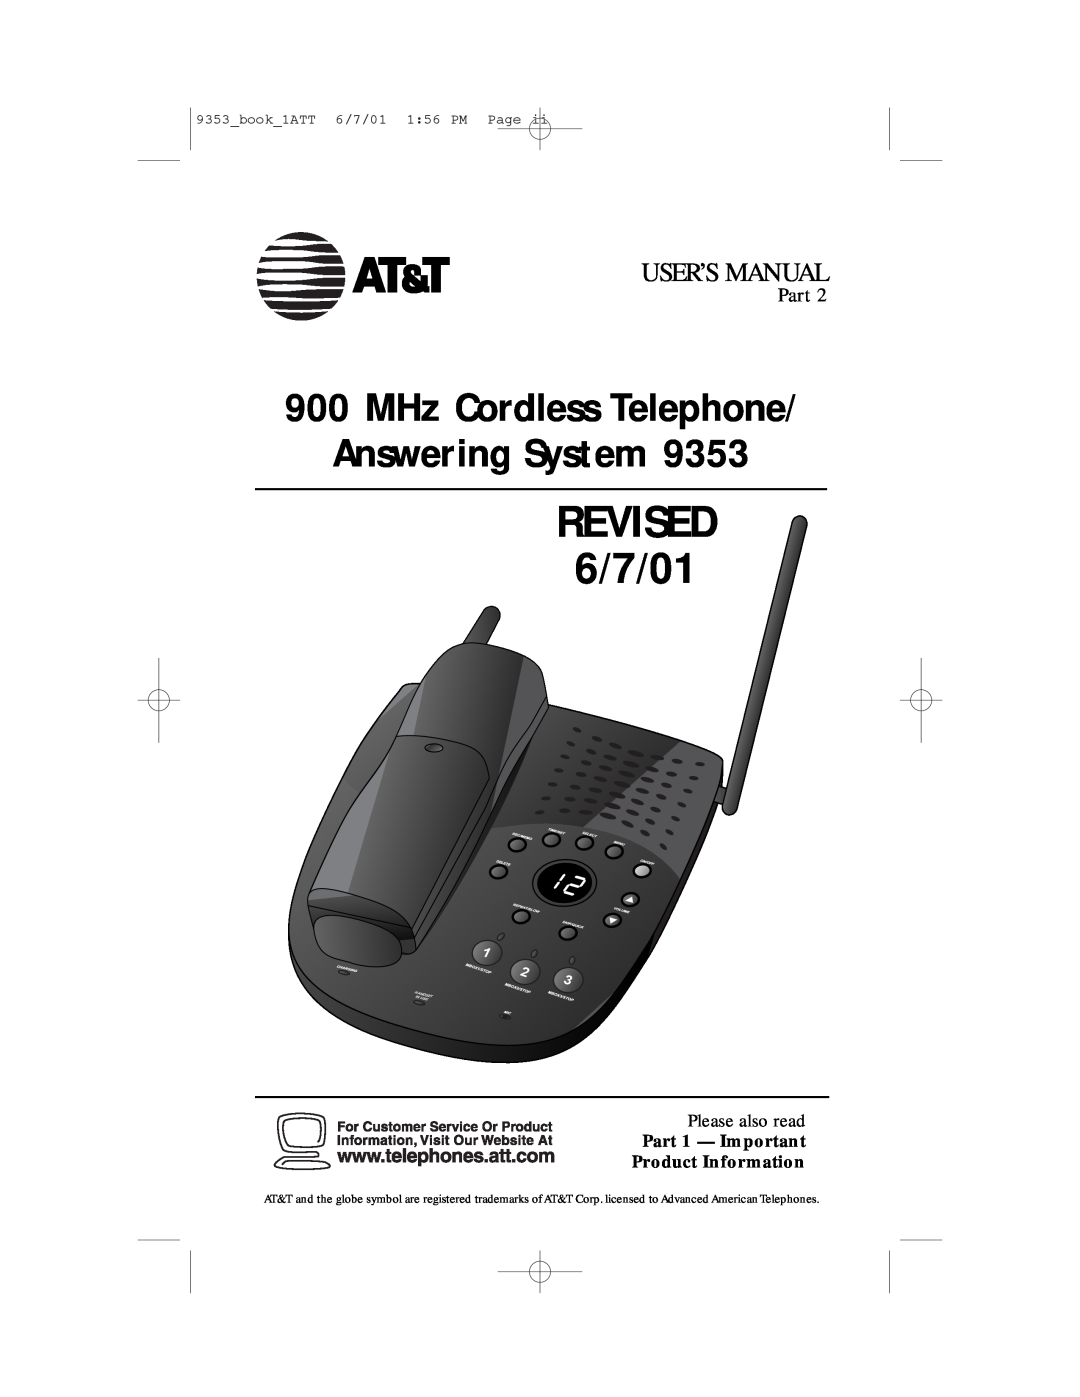 AT&T 9353 user manual MHz Cordless Telephone Answering System, Part 1 - Important Product Information, REVISED 6/7/01 